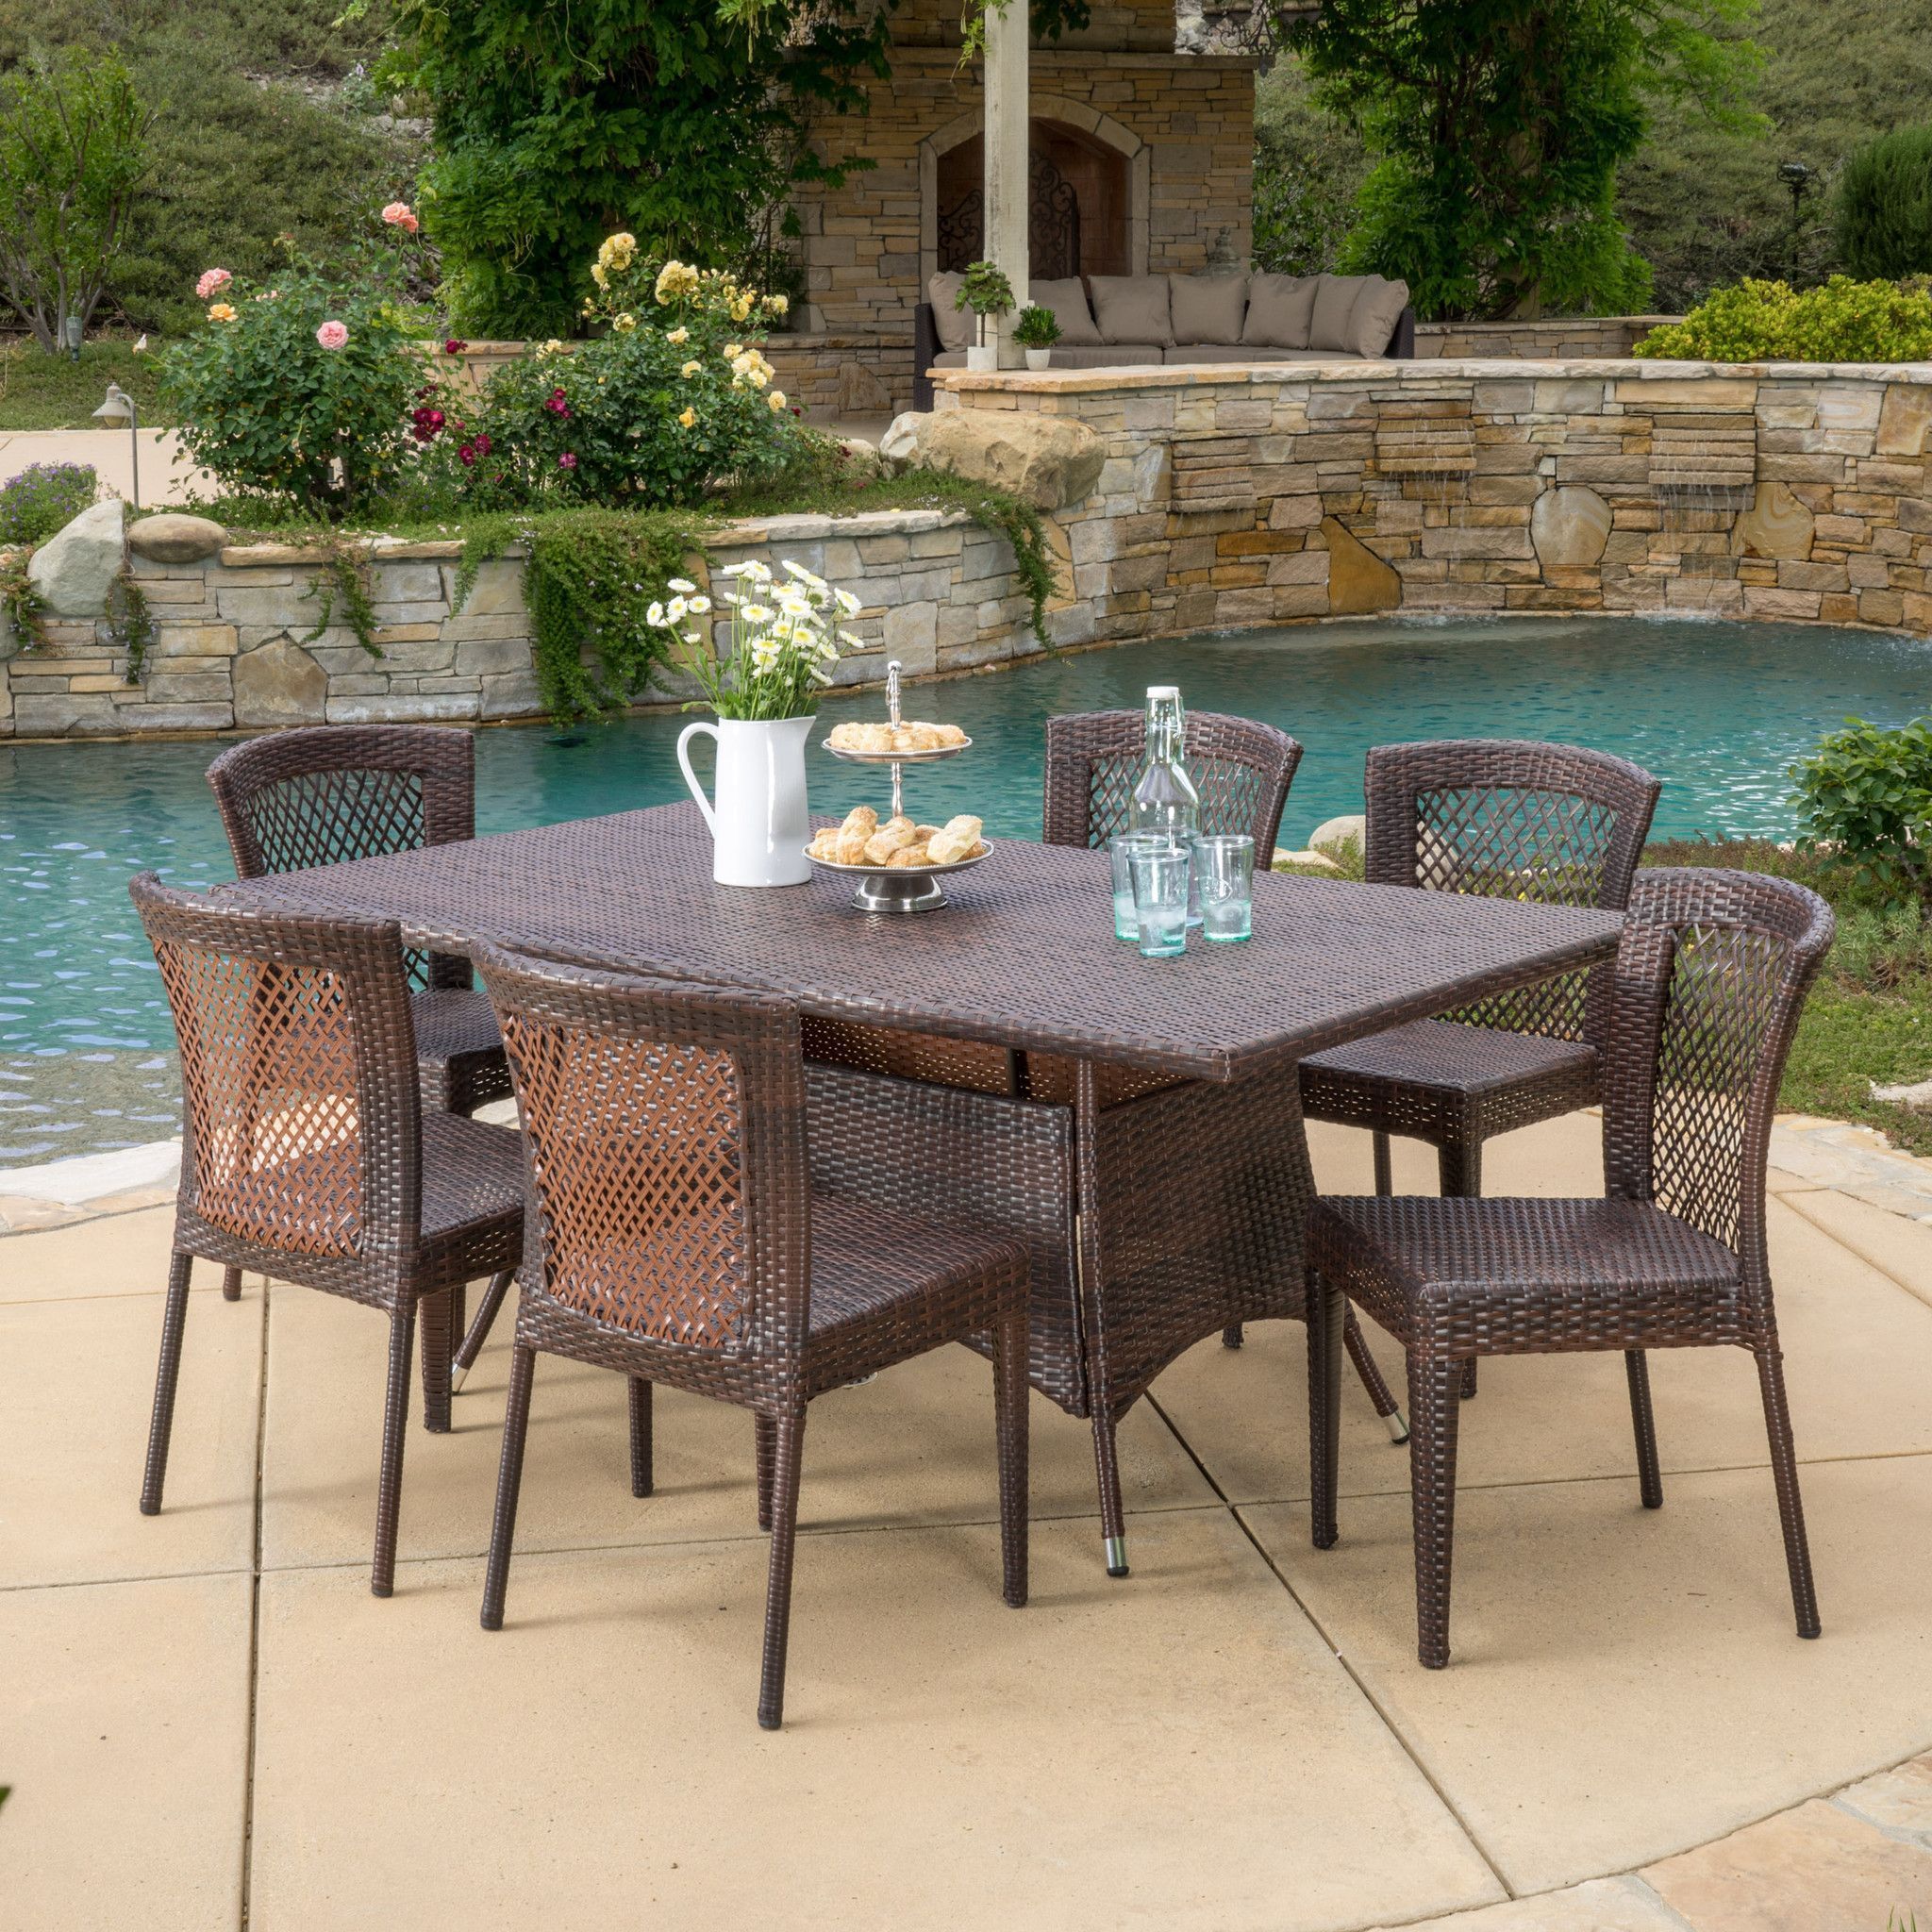 Perry Outdoor 7 Piece Multi Brown Wicker Dining Set With Umbrella Hole Intended For Brown Wicker Rectangular Patio Dining Sets (View 4 of 15)